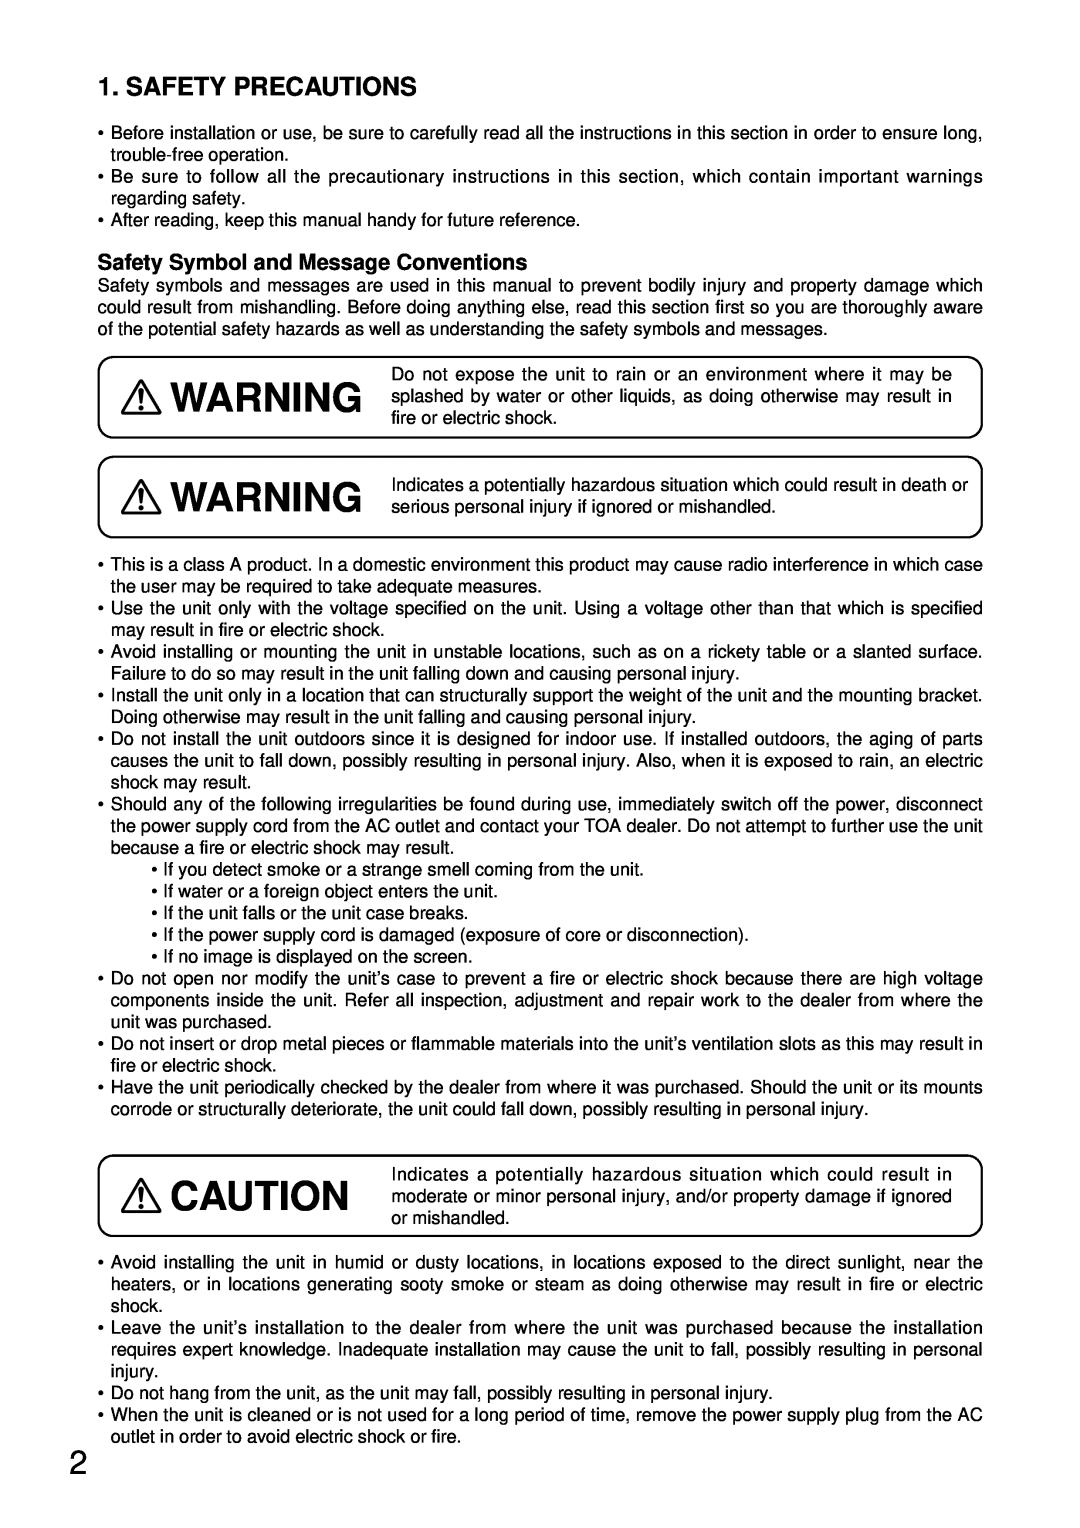 TOA Electronics C-CV24-2 NTSC instruction manual Safety Precautions, Safety Symbol and Message Conventions 